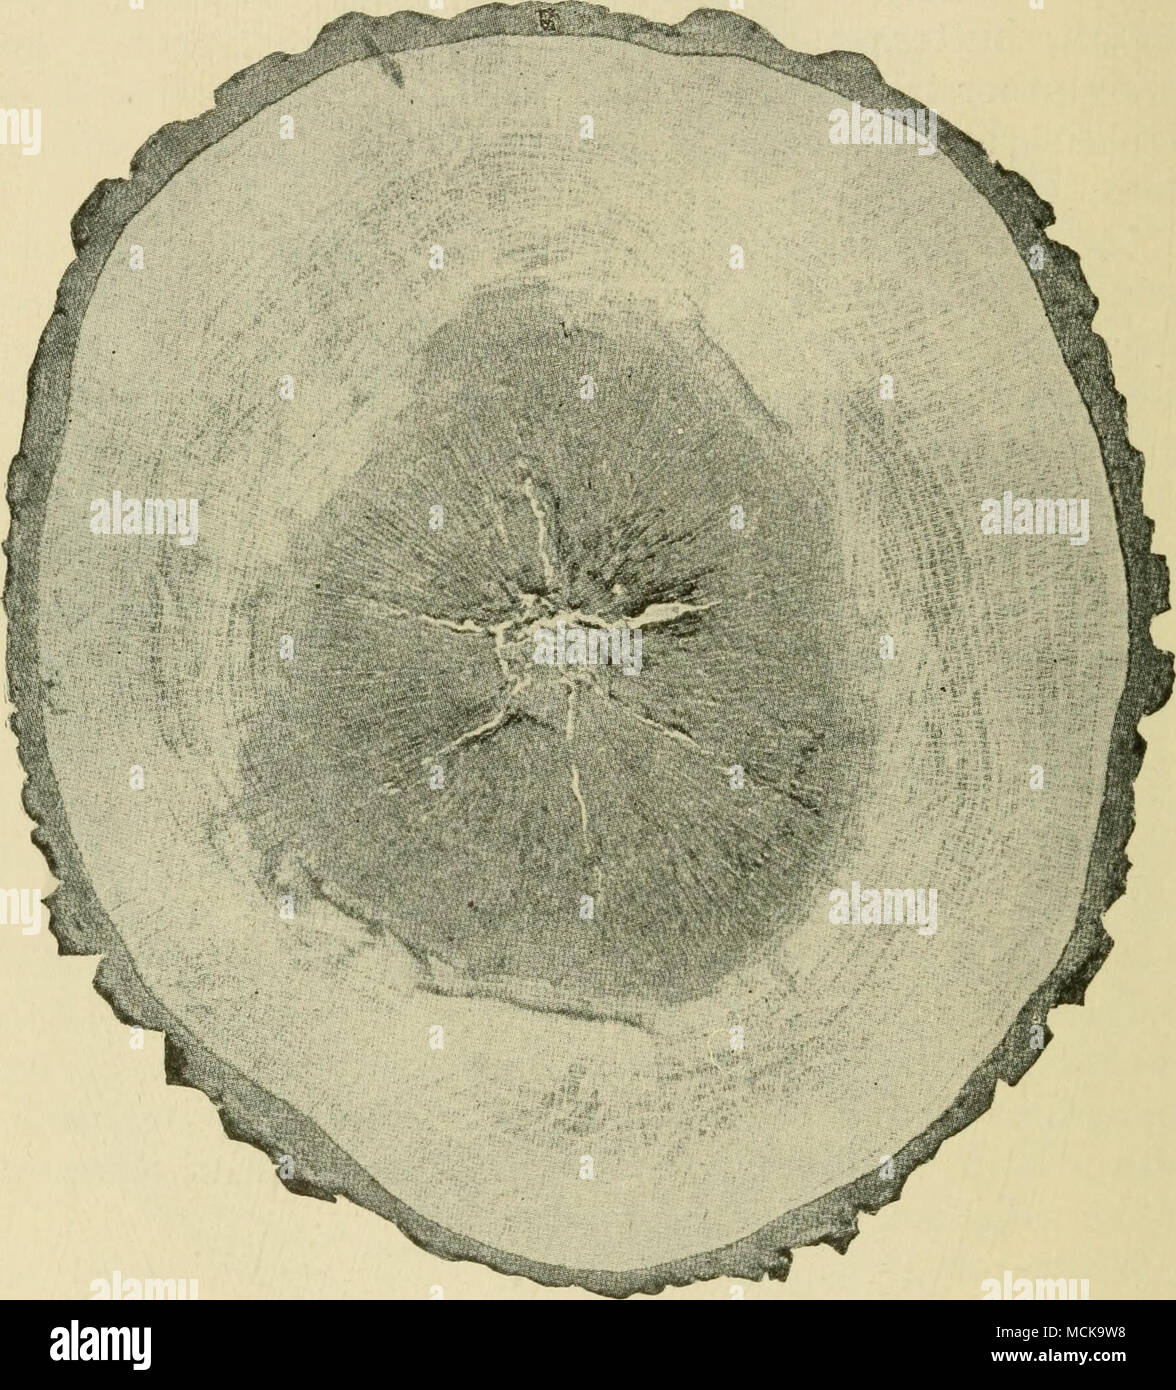 . Fig. 189. — Polyporus sulphureus showing effect upon wood of oak tree. After von Schrenk. The upper surface is very hard and bears fine, irregular fissures parallel to the edge. When mature, the upper surface is red-brown. The pores are barely visible without a hand lens. Soft-rot ^^^ {Polyporus obtusus Berk.). — The black oaks Stock Photo